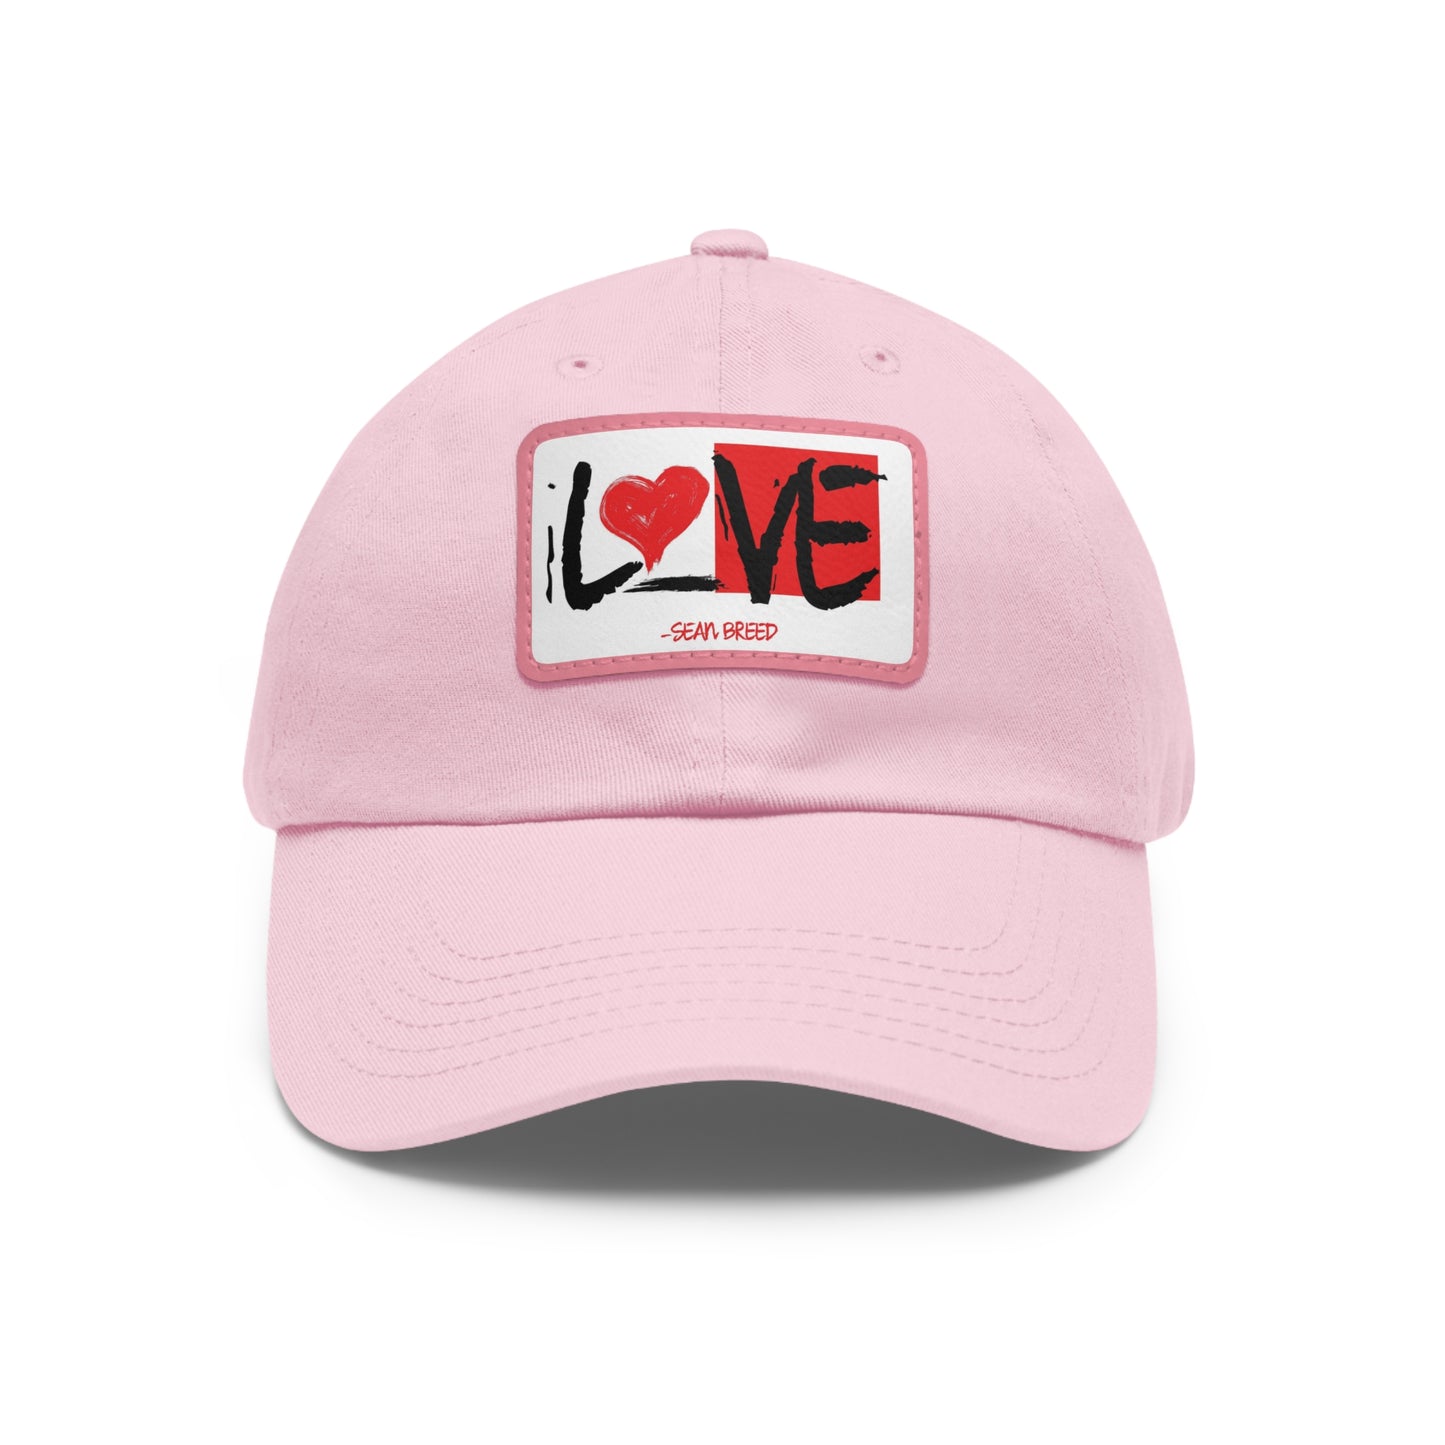 Sean Breed Mom & Dad hat with Leather Patch (Rectangle)